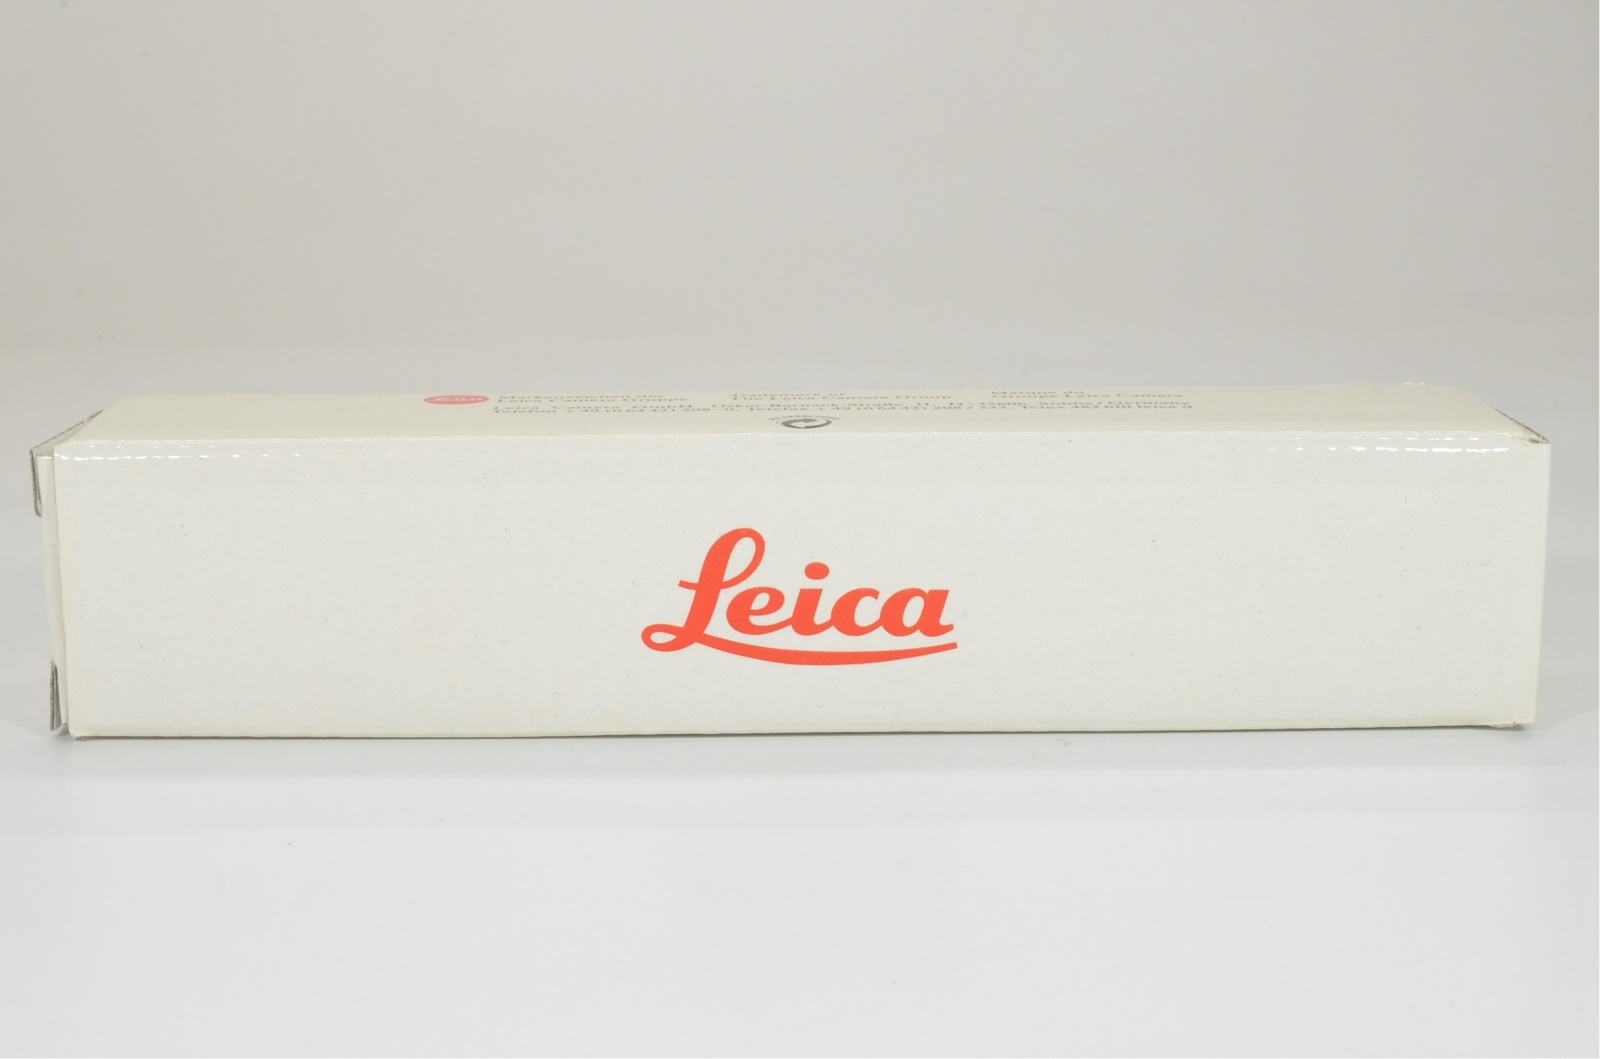 leica m6 empty box, plastic case, strap box and english instructions from japan